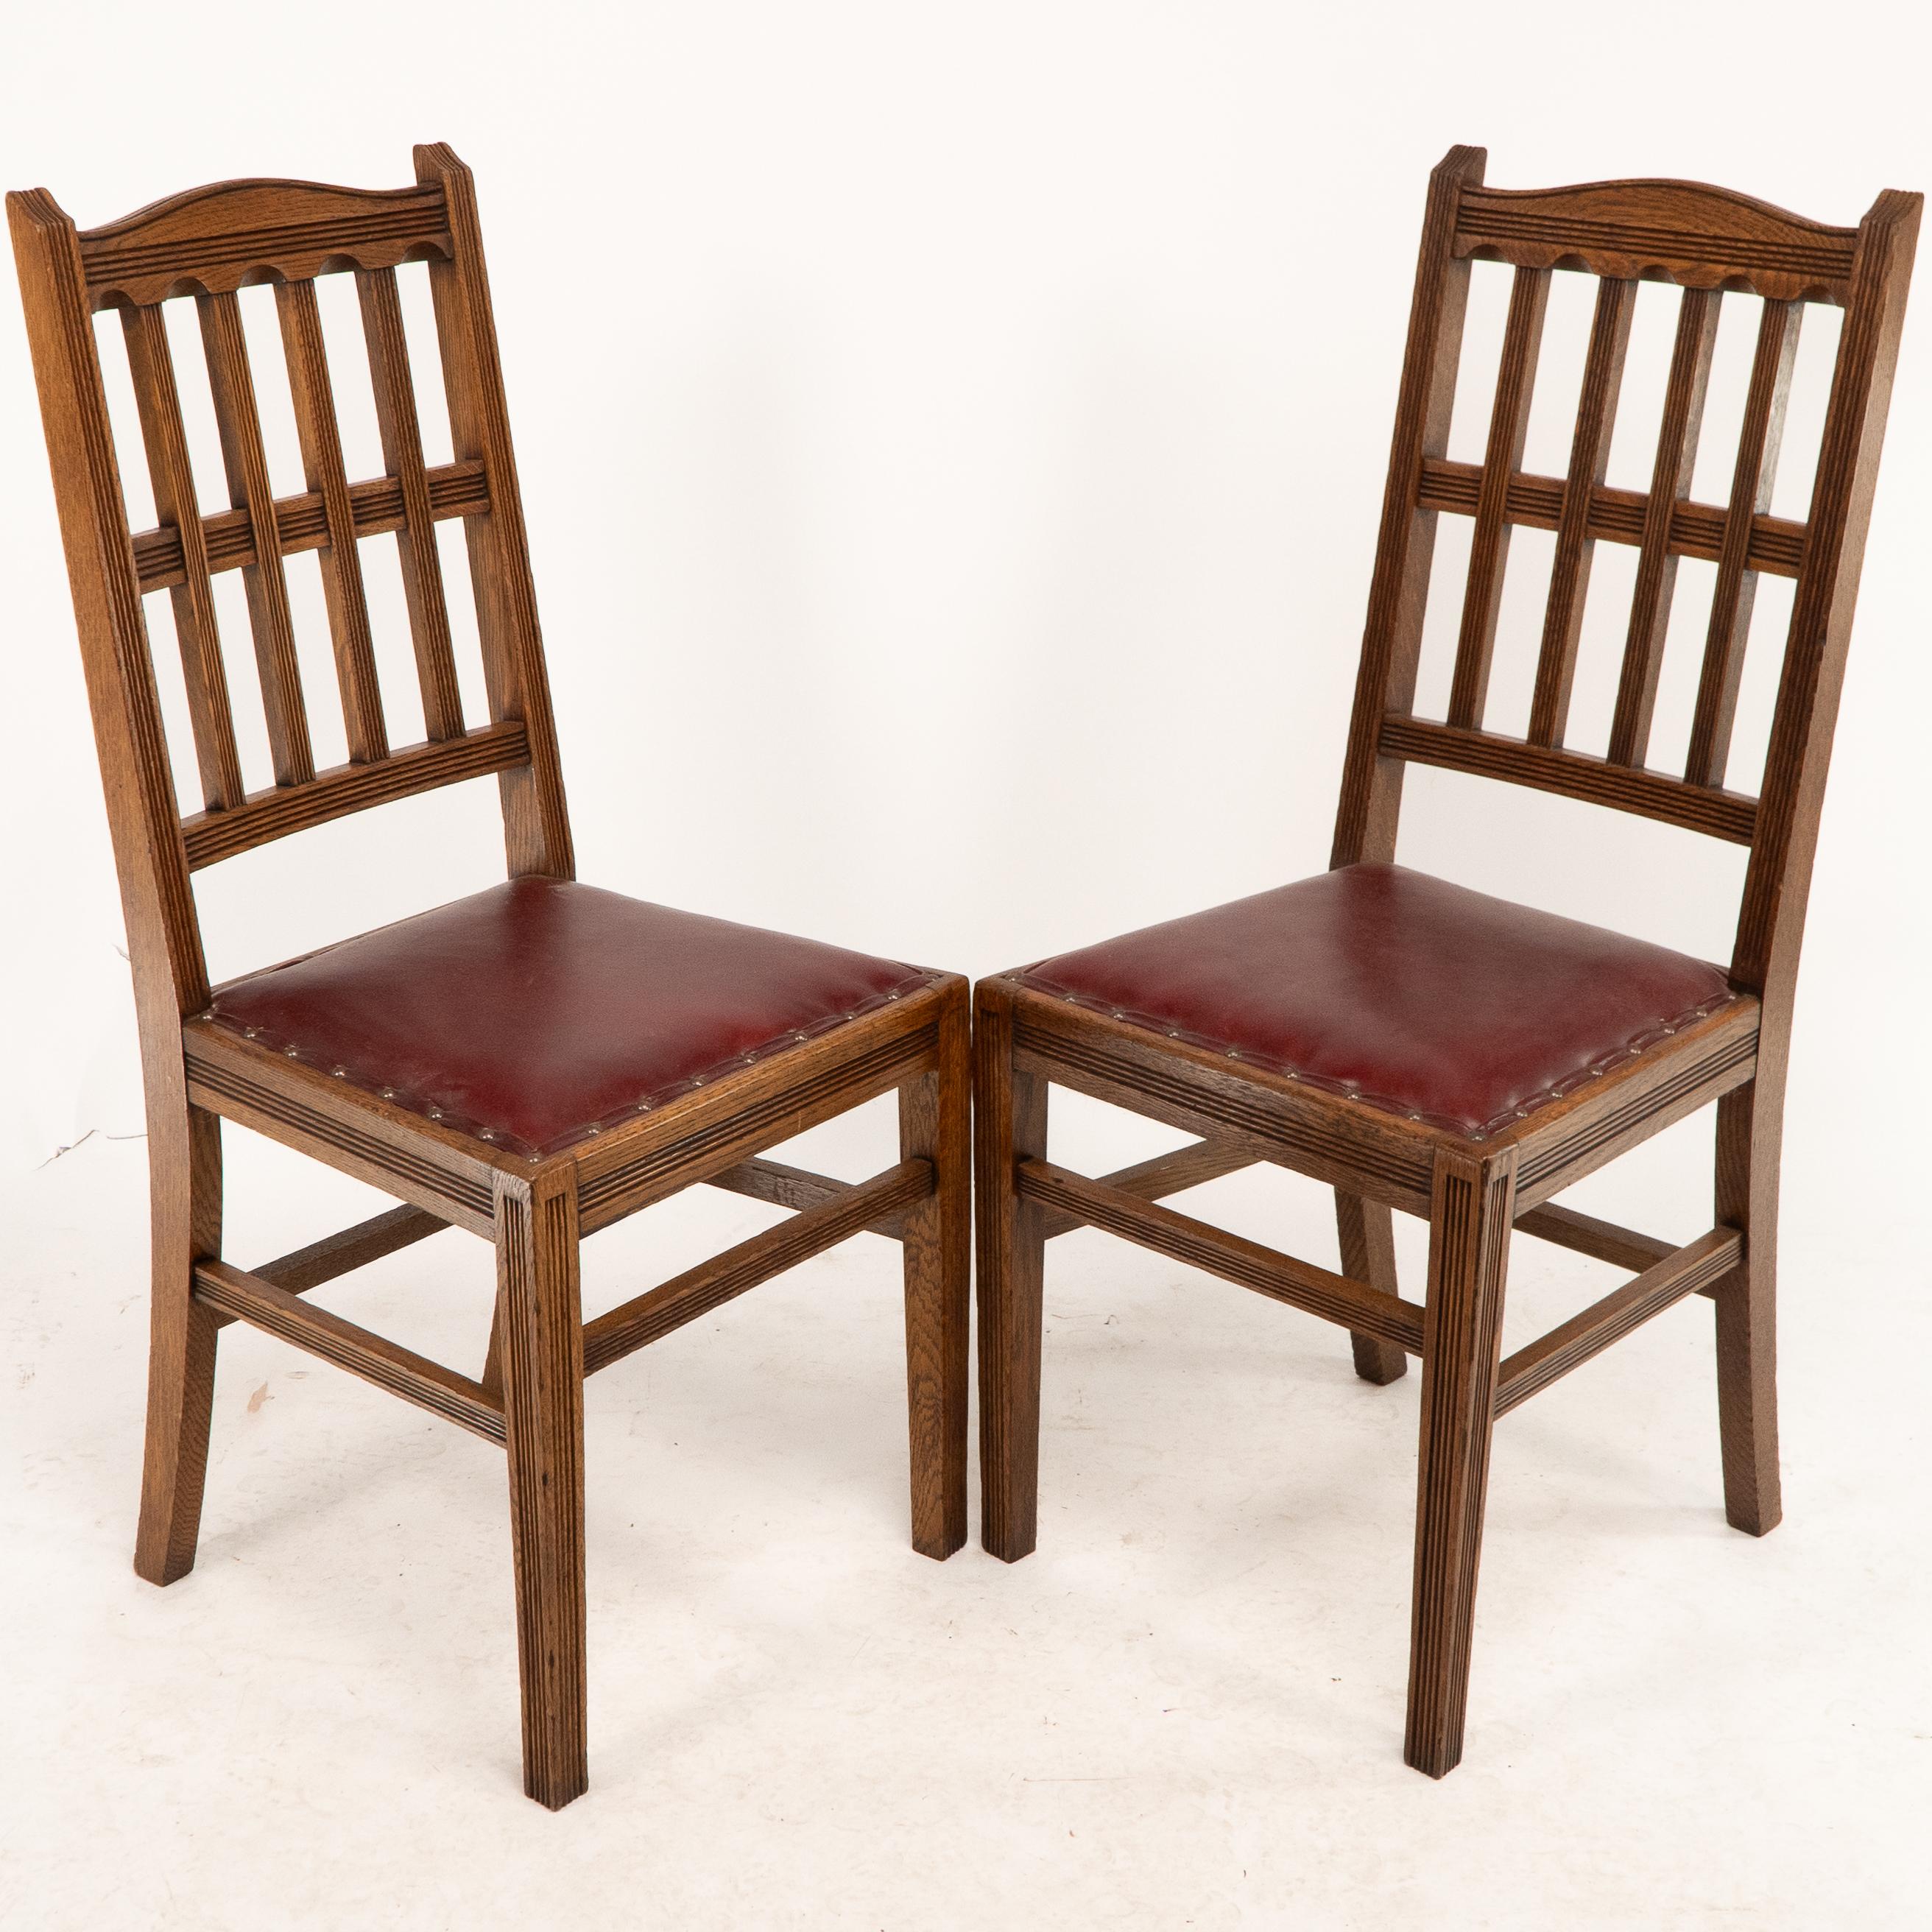 Jas Shoolbred attributed. A nice quality set of four Aesthetic Movement oak dining chairs with lattice designs to the backs and tramline details throughout, professionally reupholstered in a quality hide